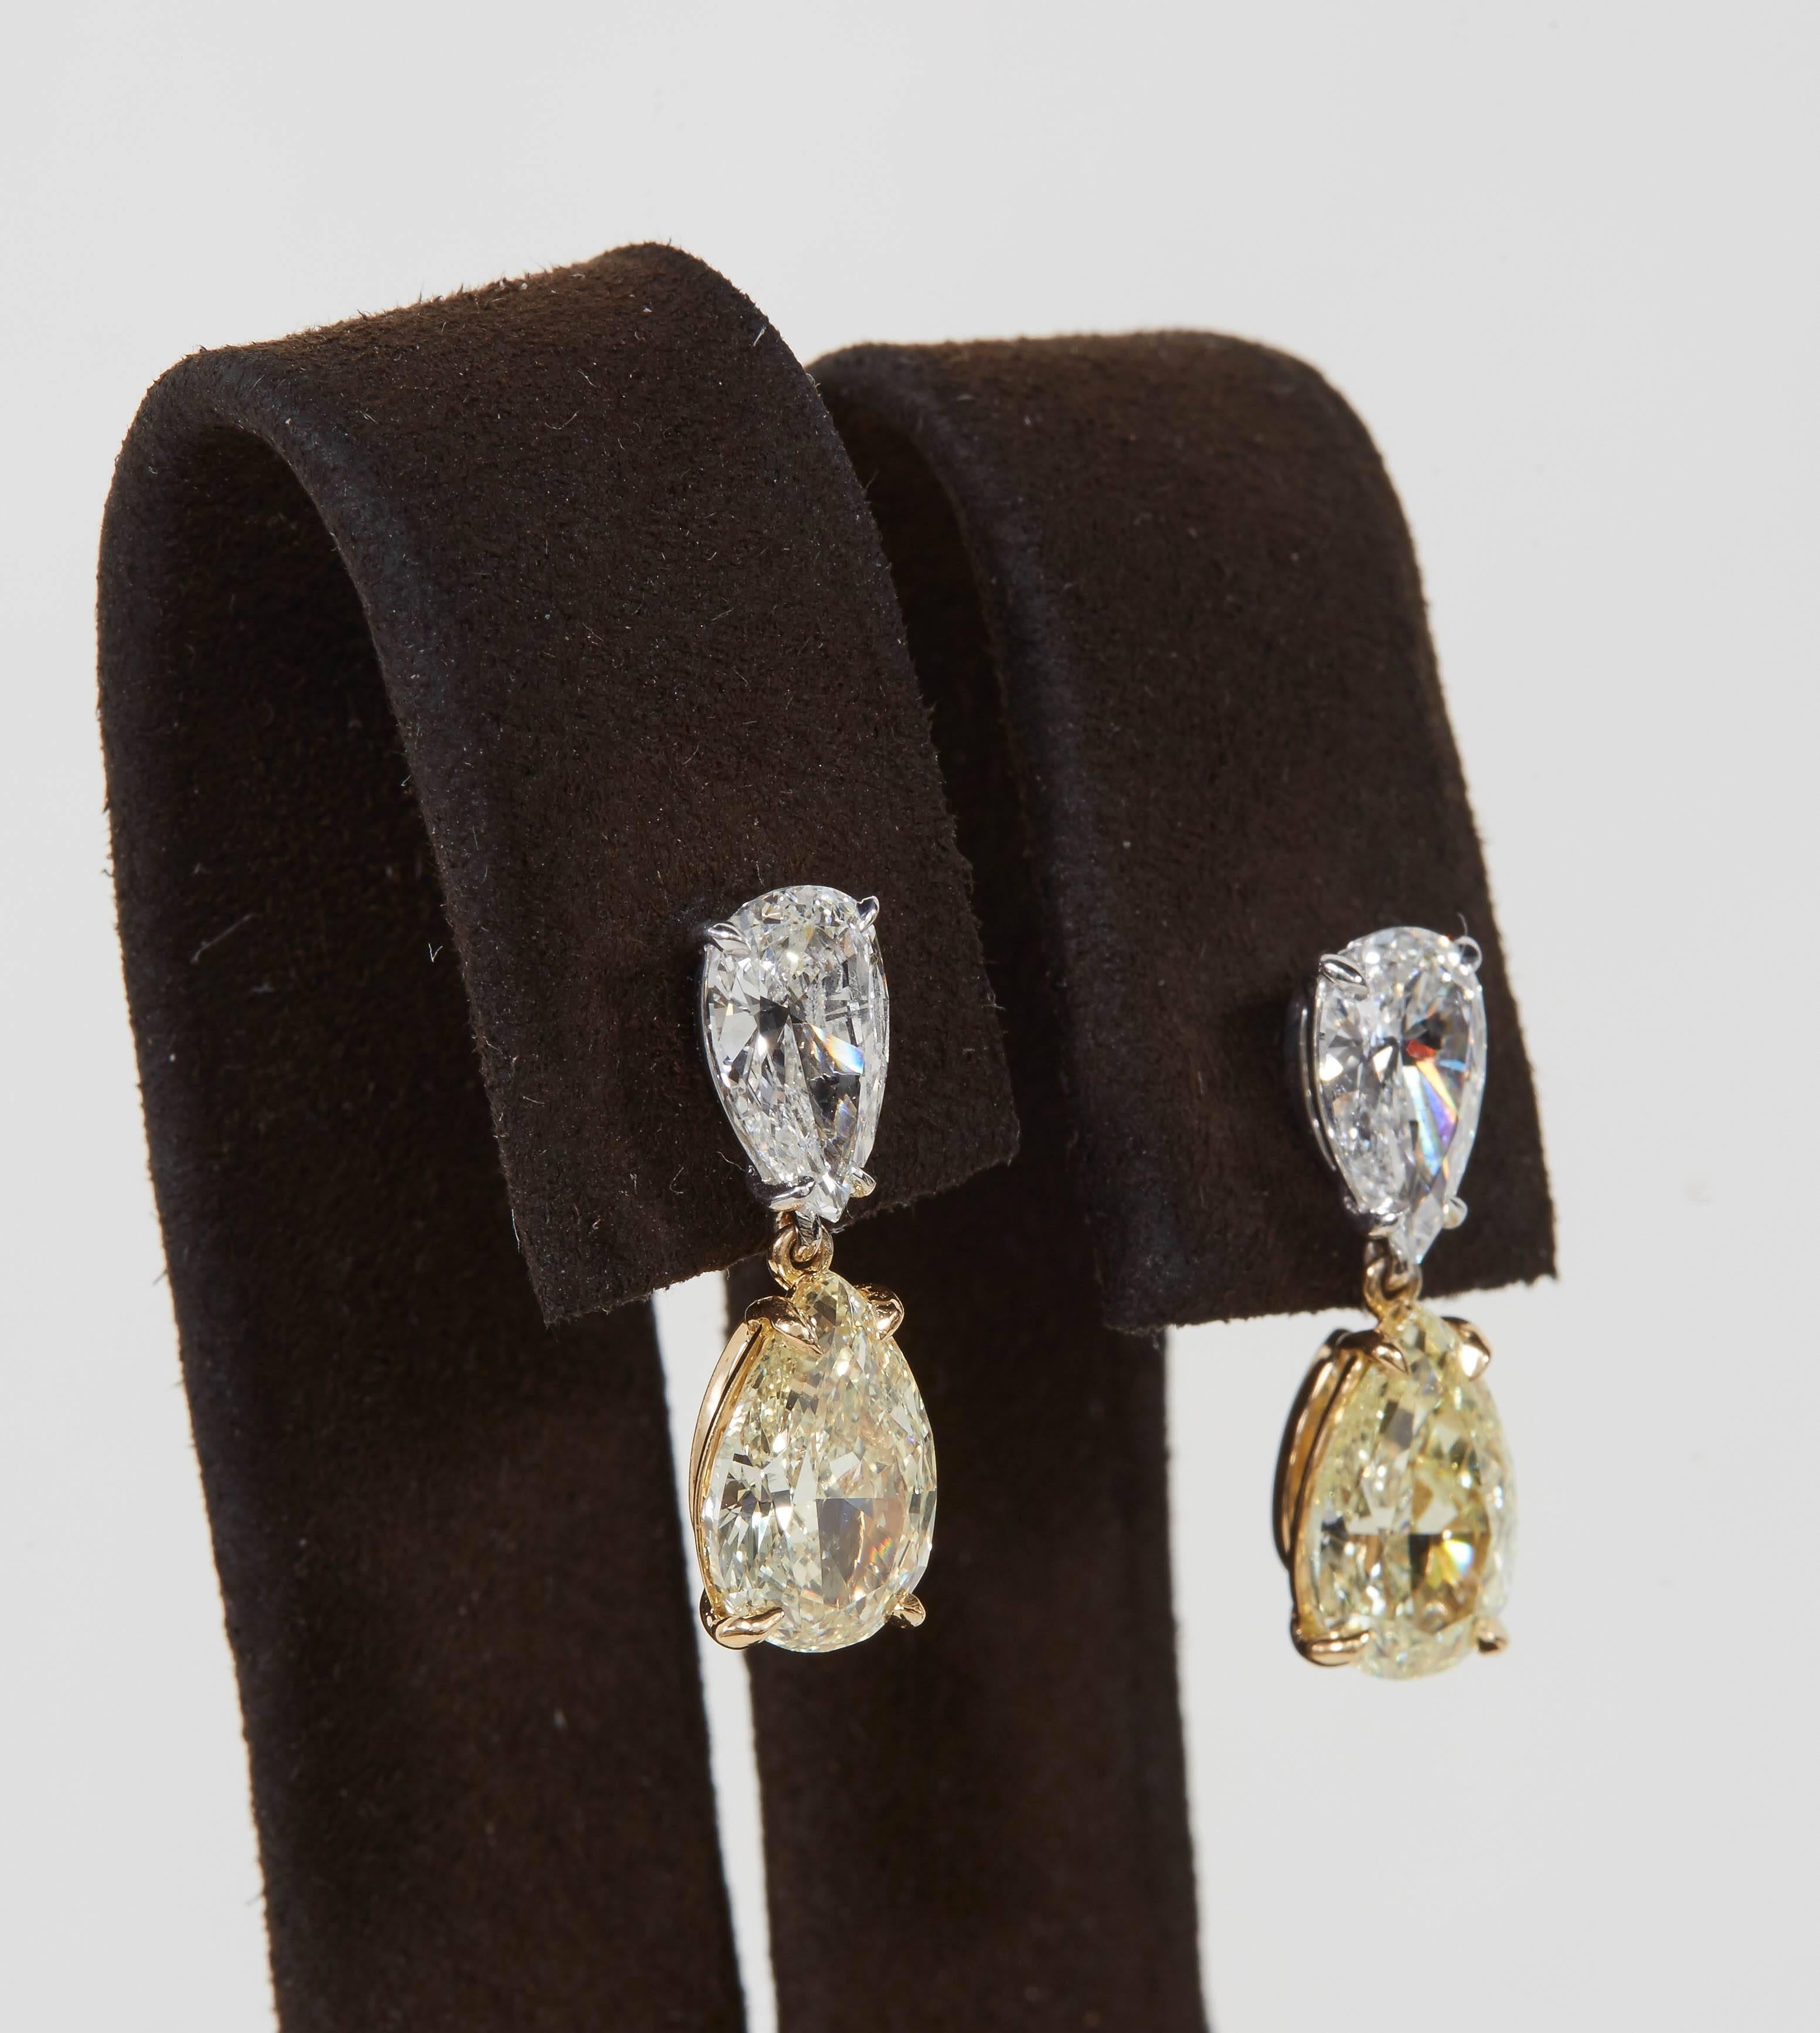 

An elegant pair of yellow diamond earrings.

A total of 1.82 carats of white pear shape diamonds 

A total of 4.01 carats of GIA certified Fancy Light Yellow VVS2 and VS2 diamond drops. 

All handmade in New York and set in 18k white and yellow